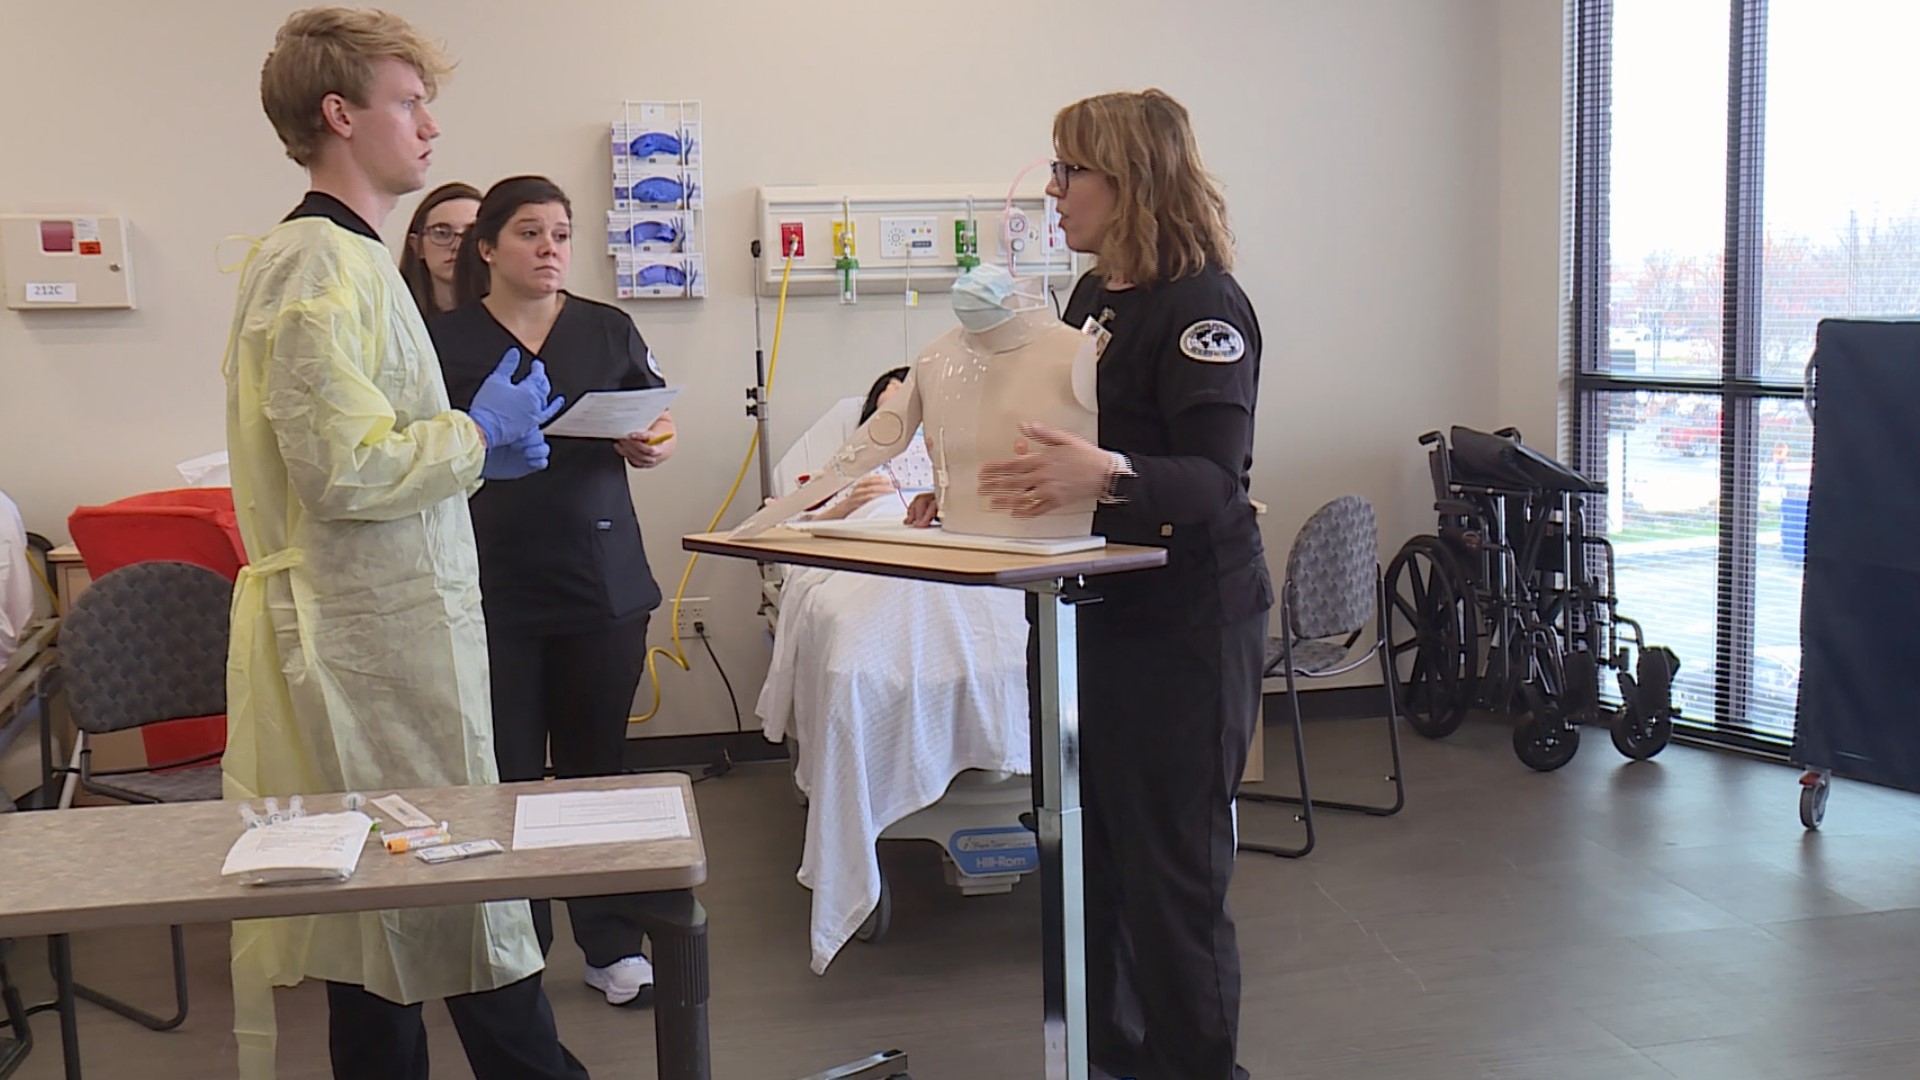 The hybrid learning program will offer hands-on simulations that enable nursing students to test their critical thinking, judgment and clinical skills.